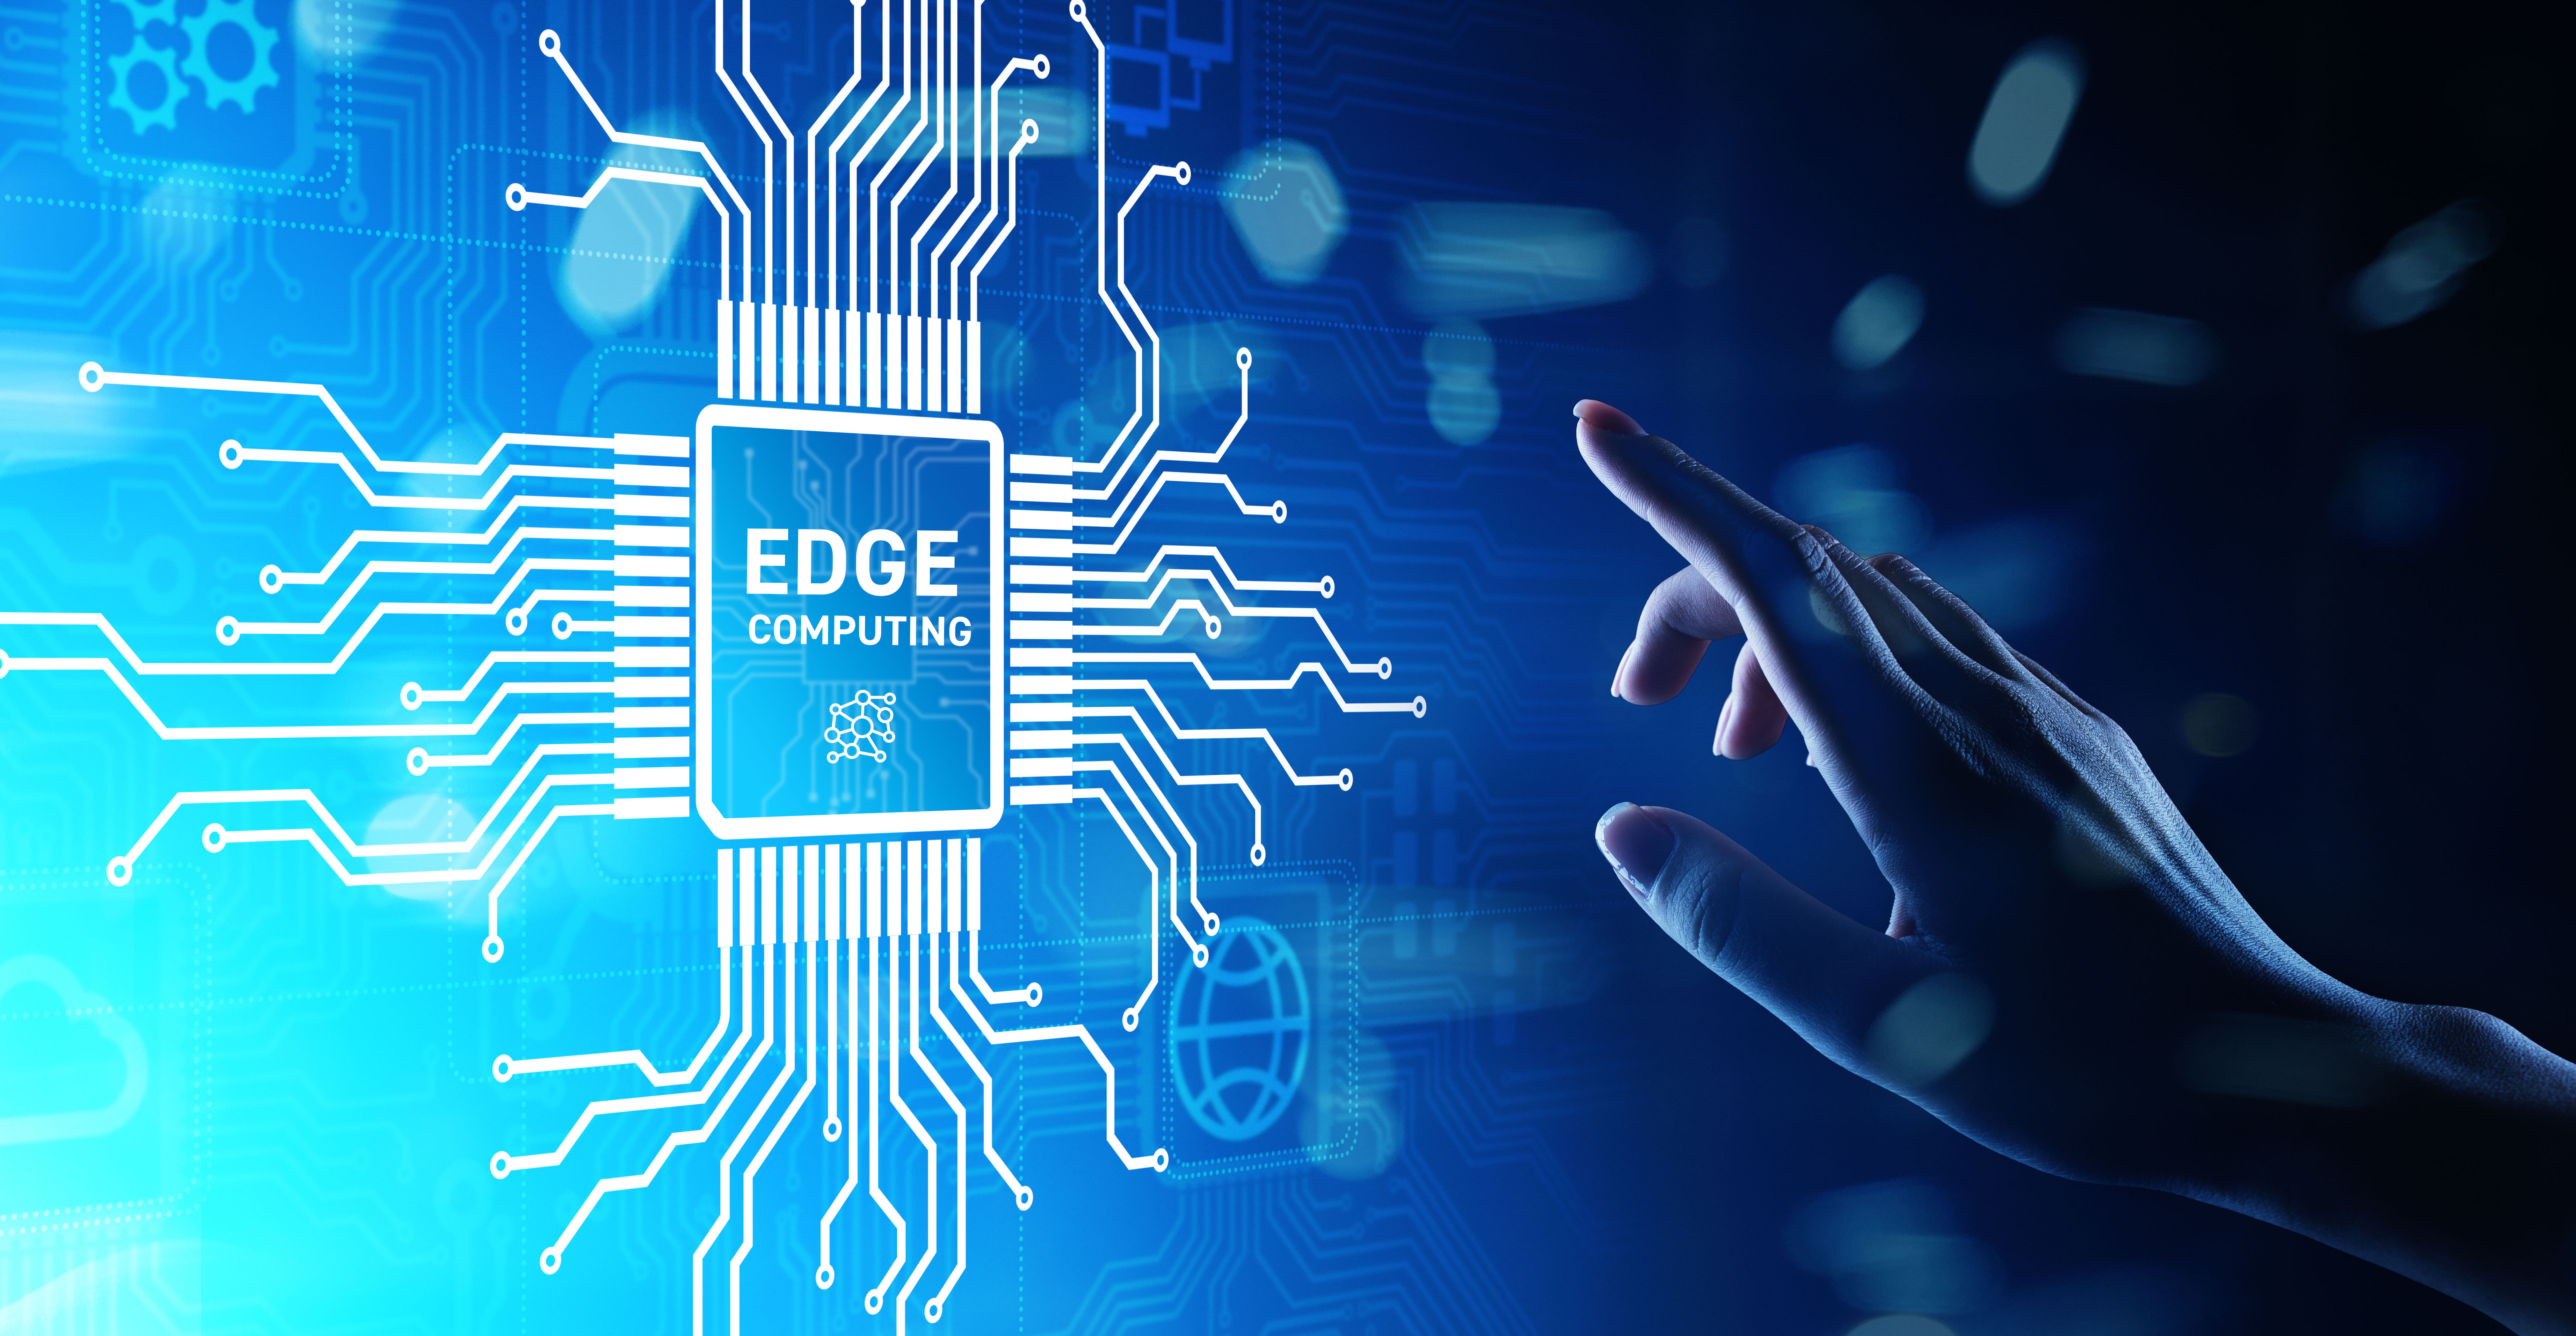 Getting closer to the edge with edge computing